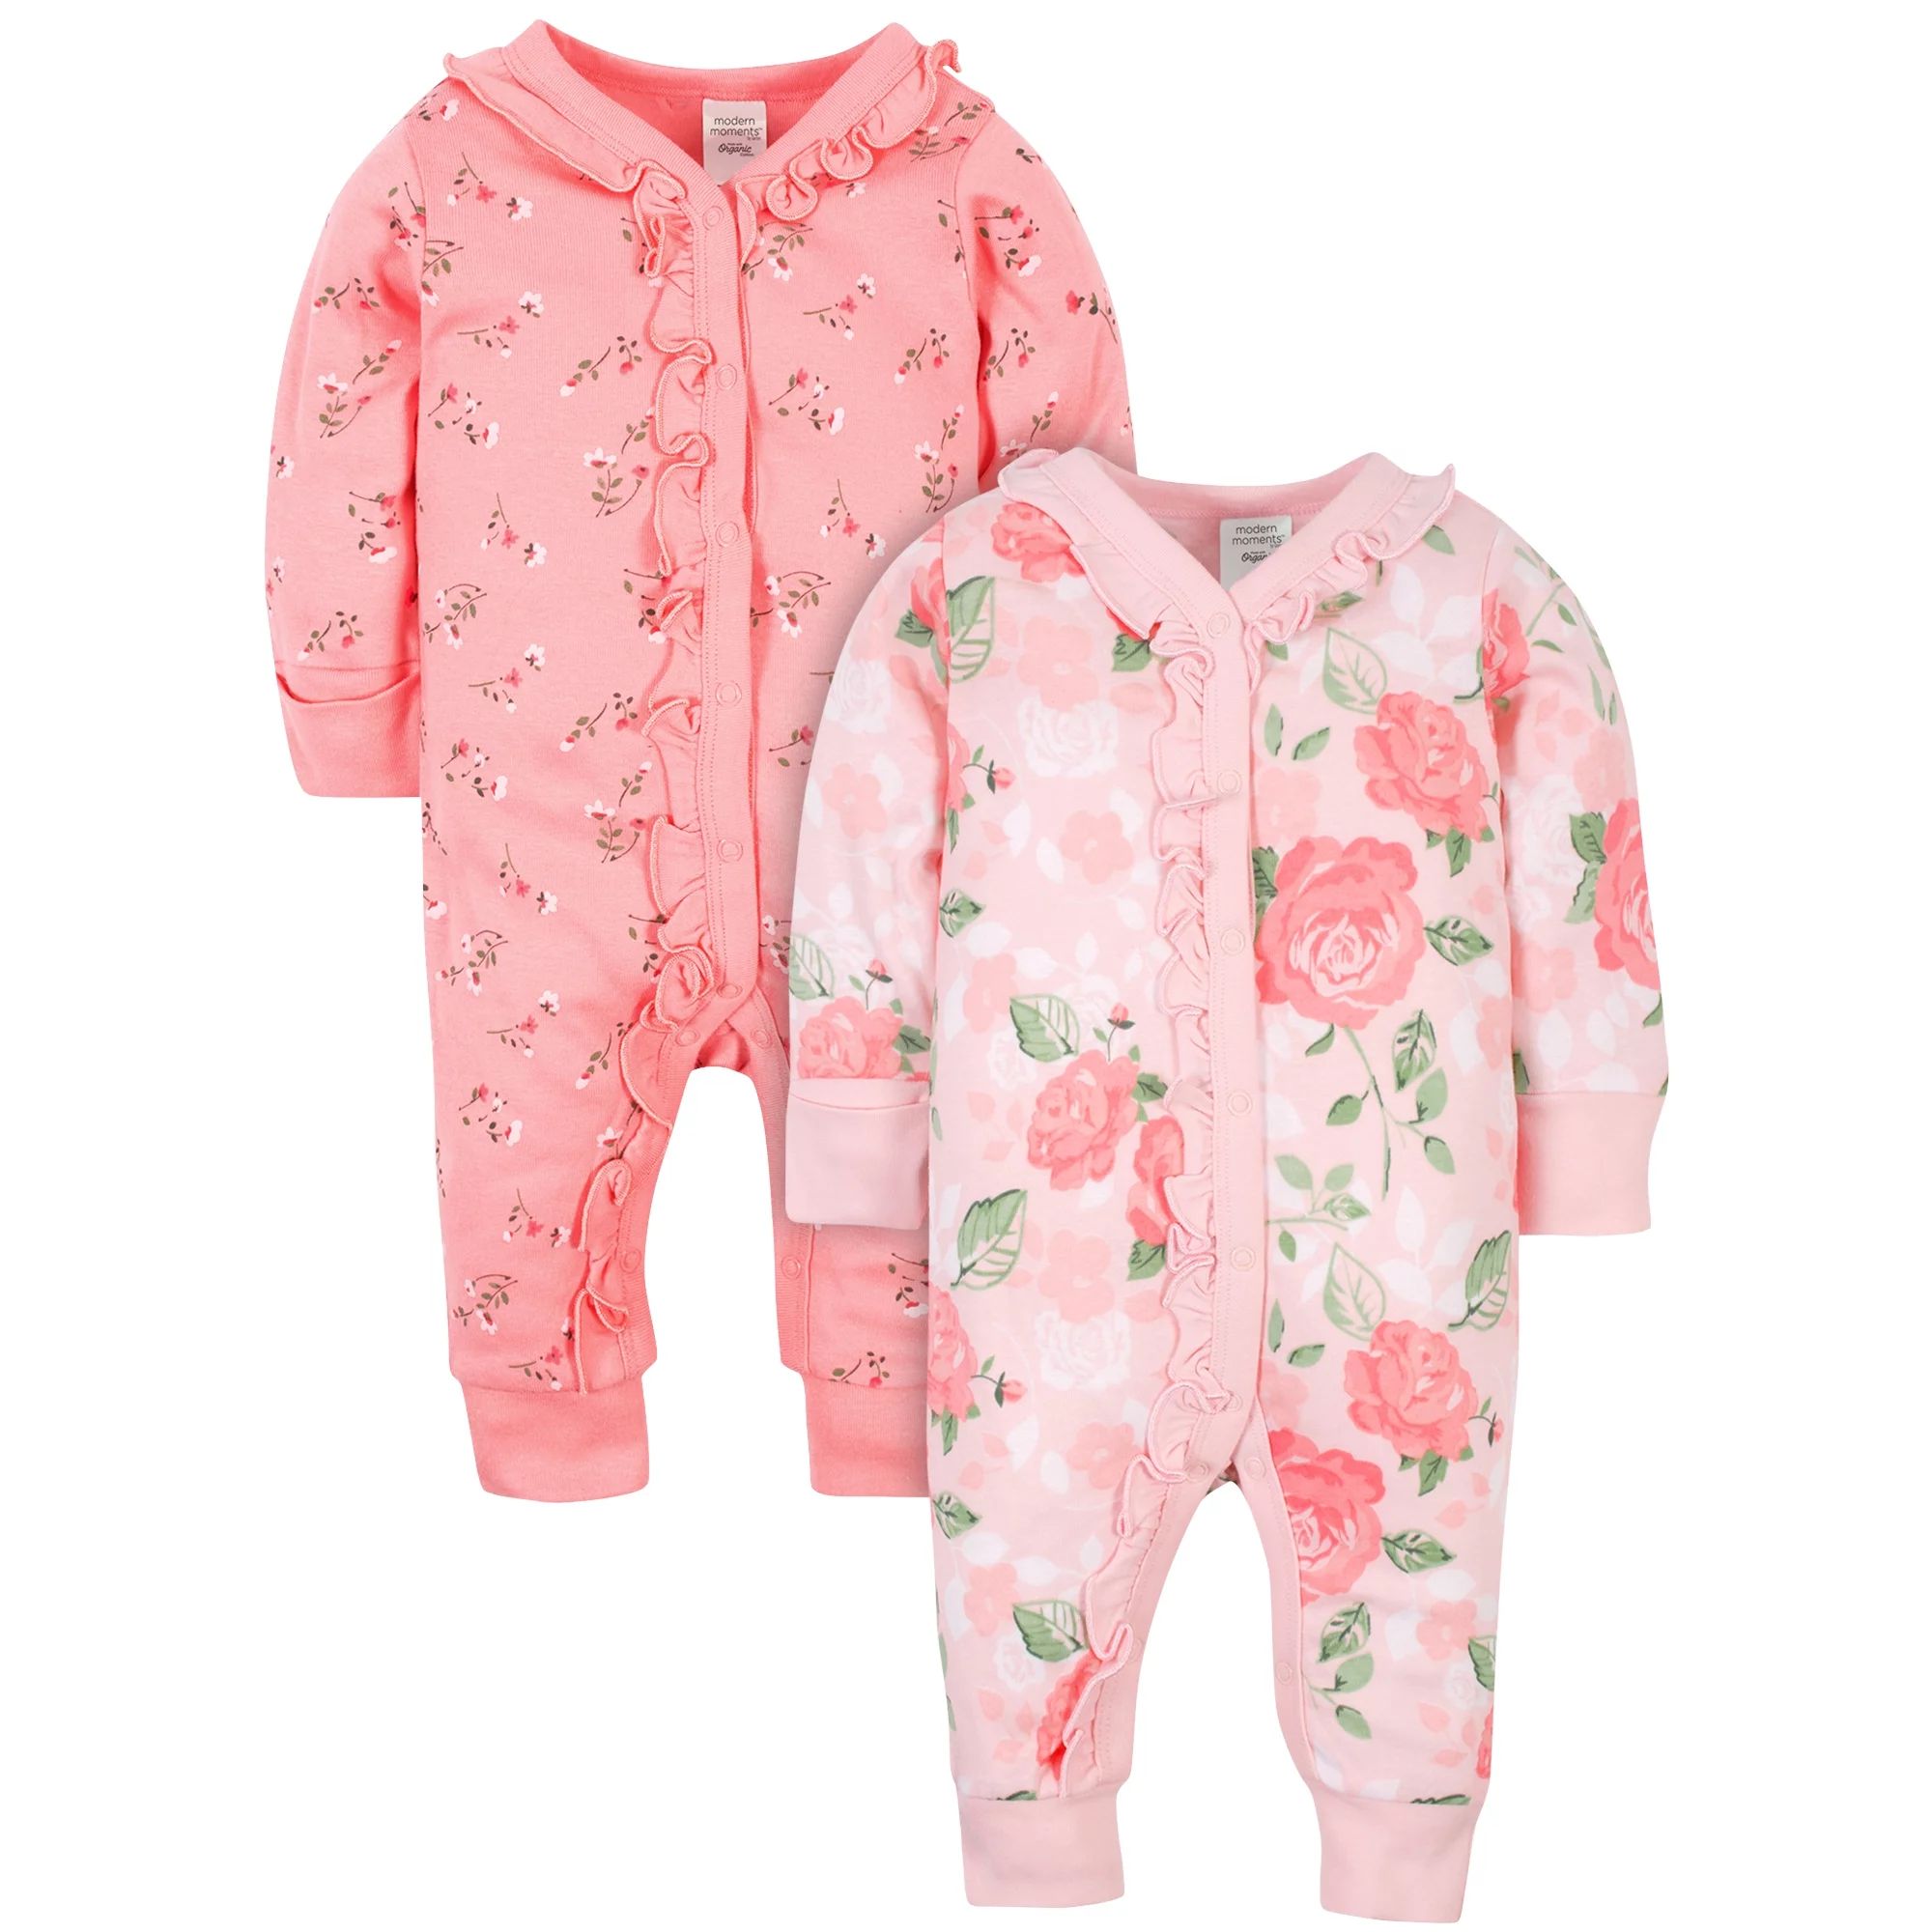 Modern Moments by Gerber Baby Girls Coveralls, 2-Pack (NB-12M) | Walmart (US)